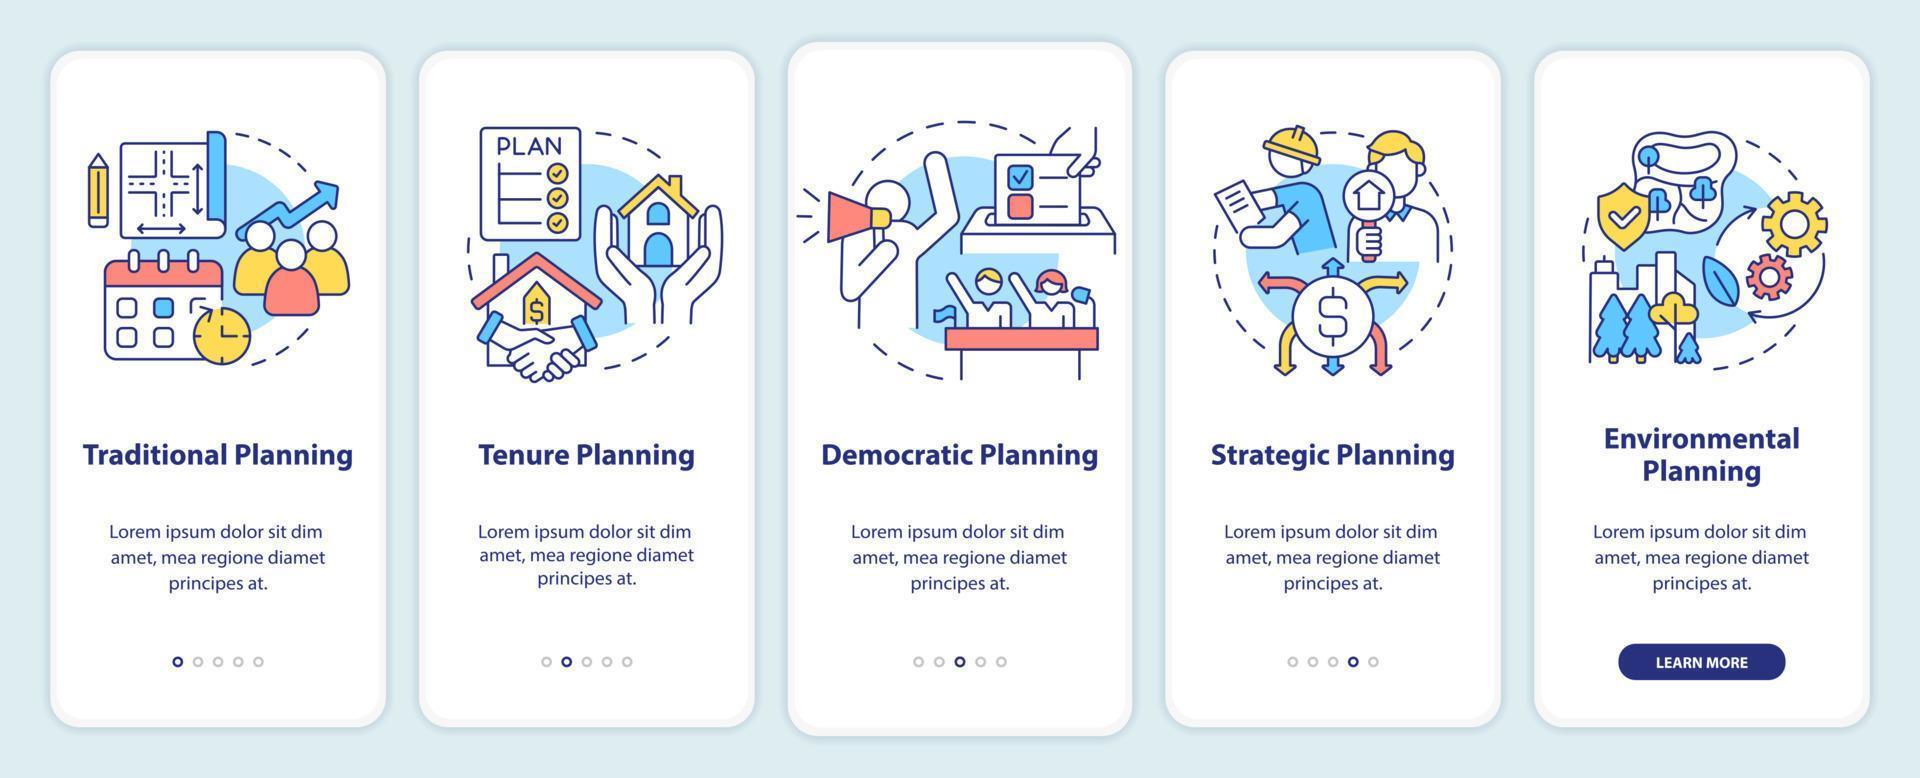 Types of planning onboarding mobile app screen. Tenure planning walkthrough 5 steps graphic instructions pages with linear concepts. UI, UX, GUI template. vector